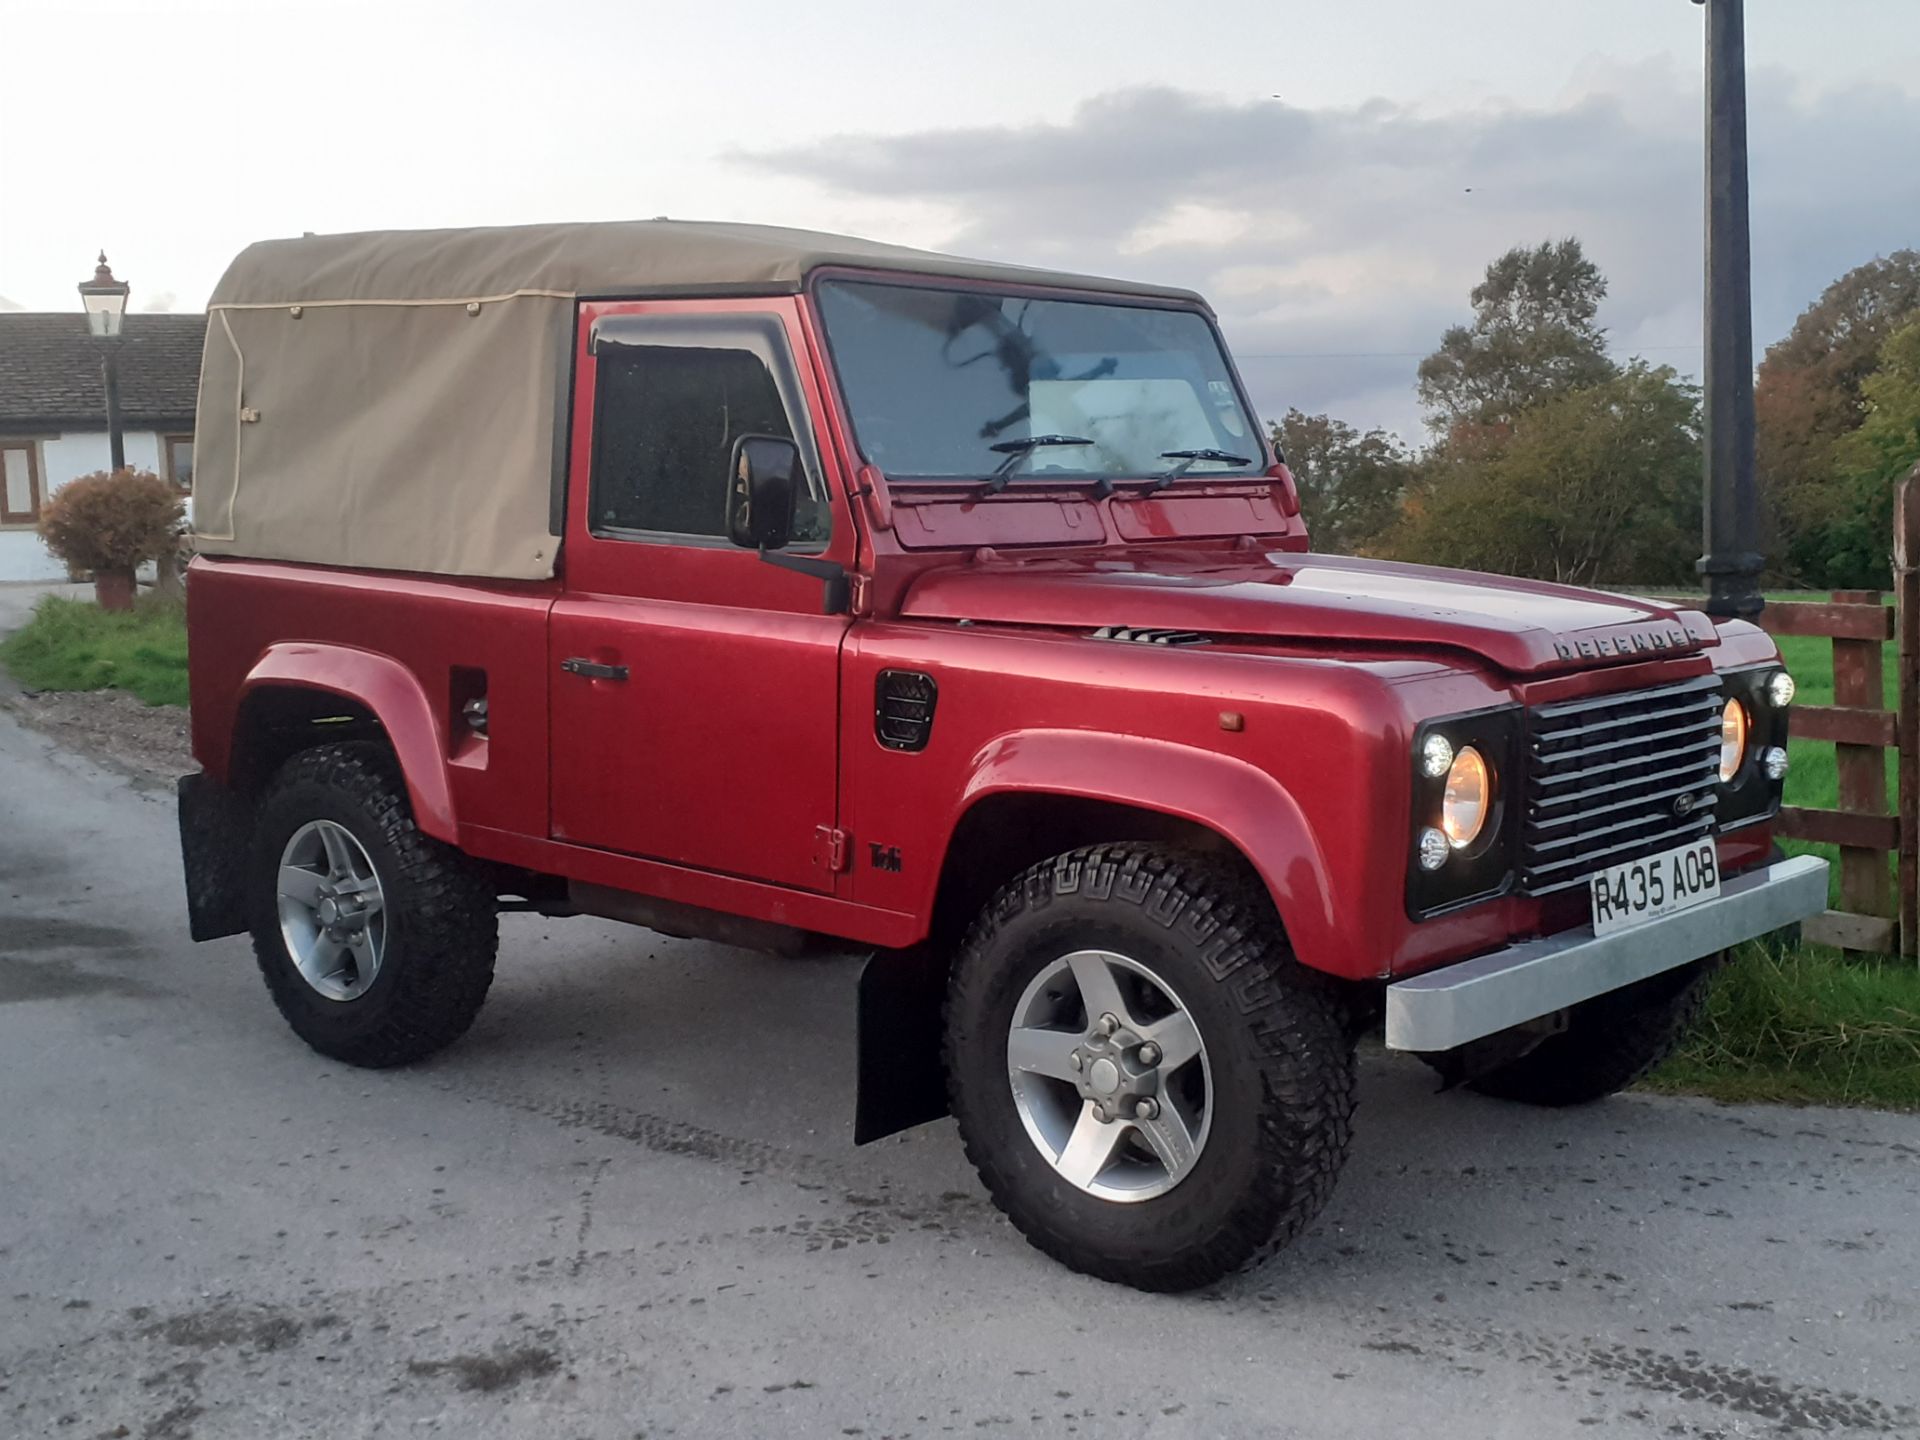 1998/R REG LAND ROVER DEFENDER 90 CSW TDI 95 RED CONVERTIBLE 6 SEATER, SHOWING 2 FORMER KEEPERS